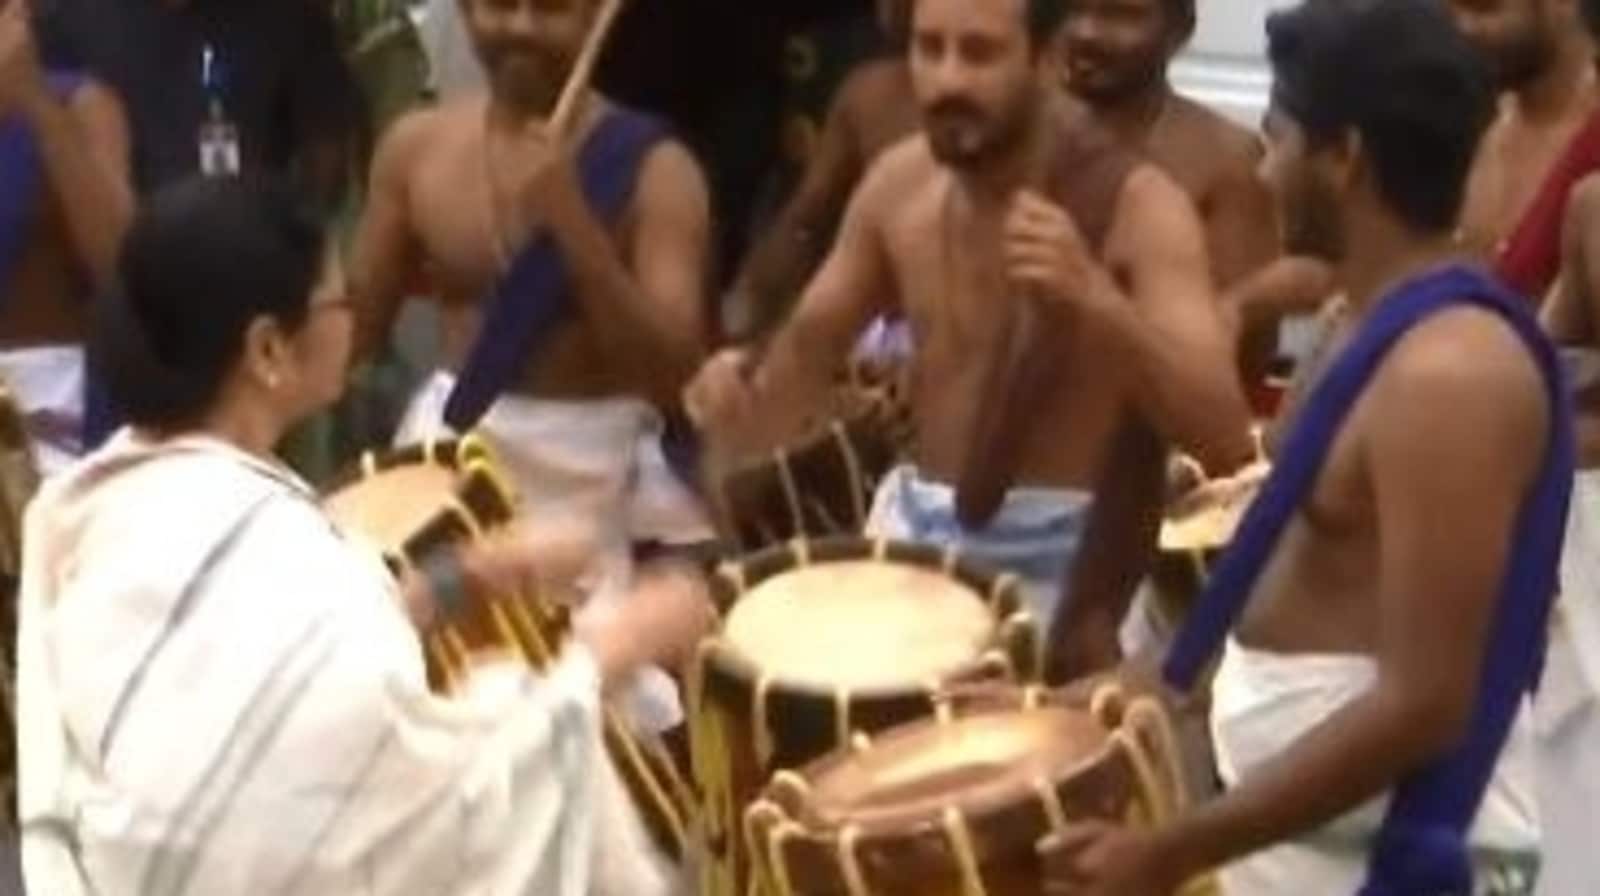 Mamata Banerjee Sex Opan Xxx - Watch: In Chennai, Mamata Banerjee plays drums at Bengal governor's event |  Latest News India - Hindustan Times